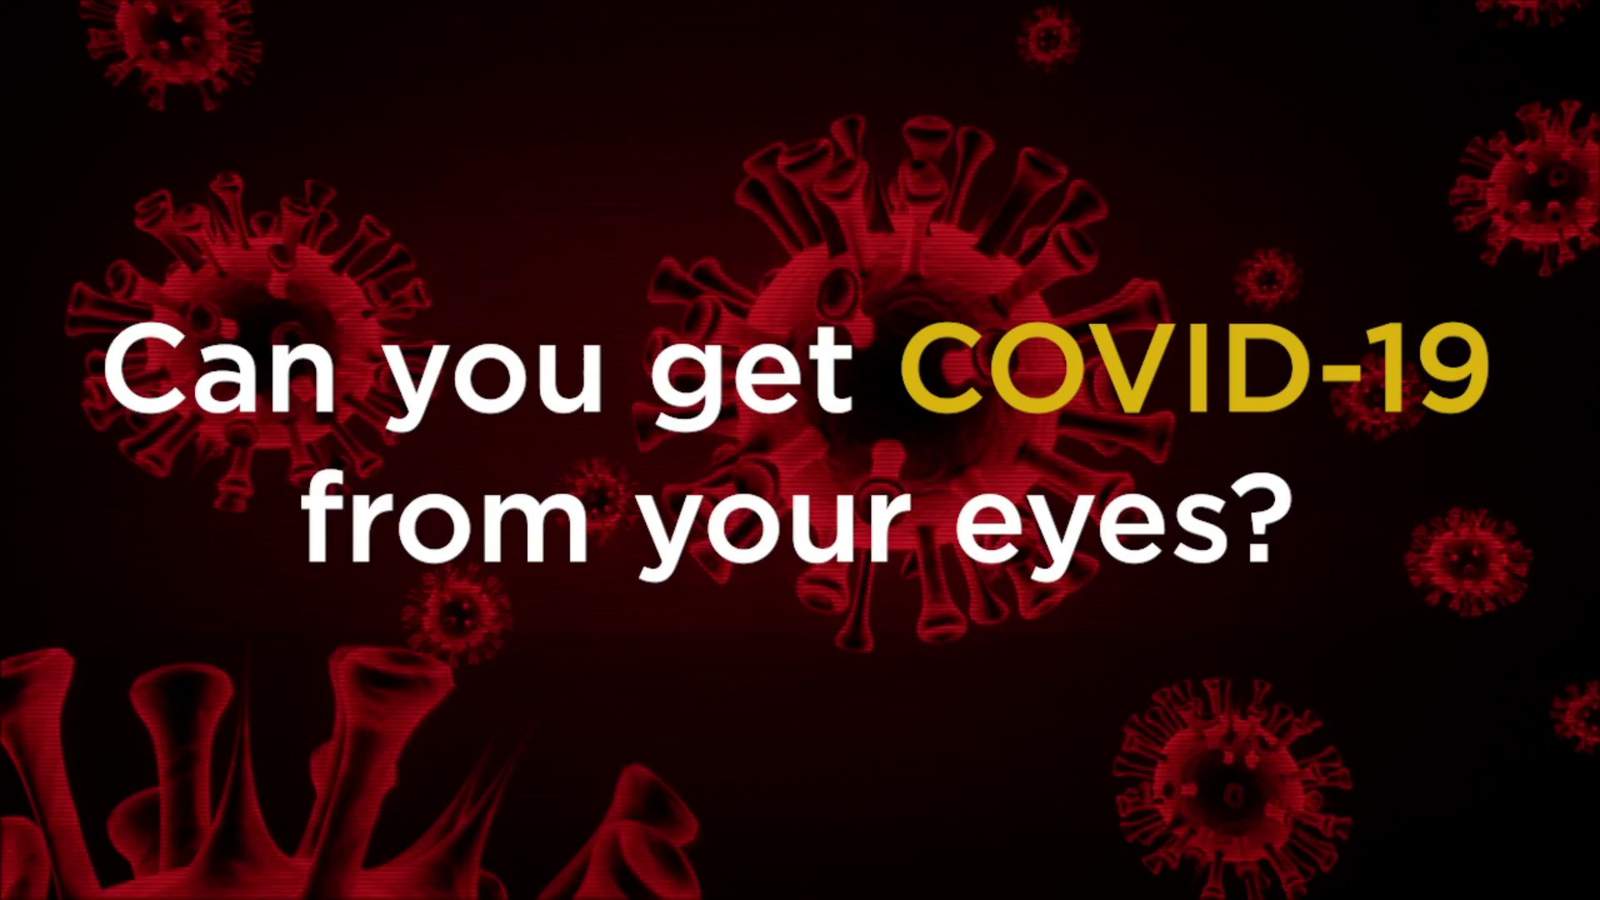 SAQ: Can you get COVID-19 through your eyes?